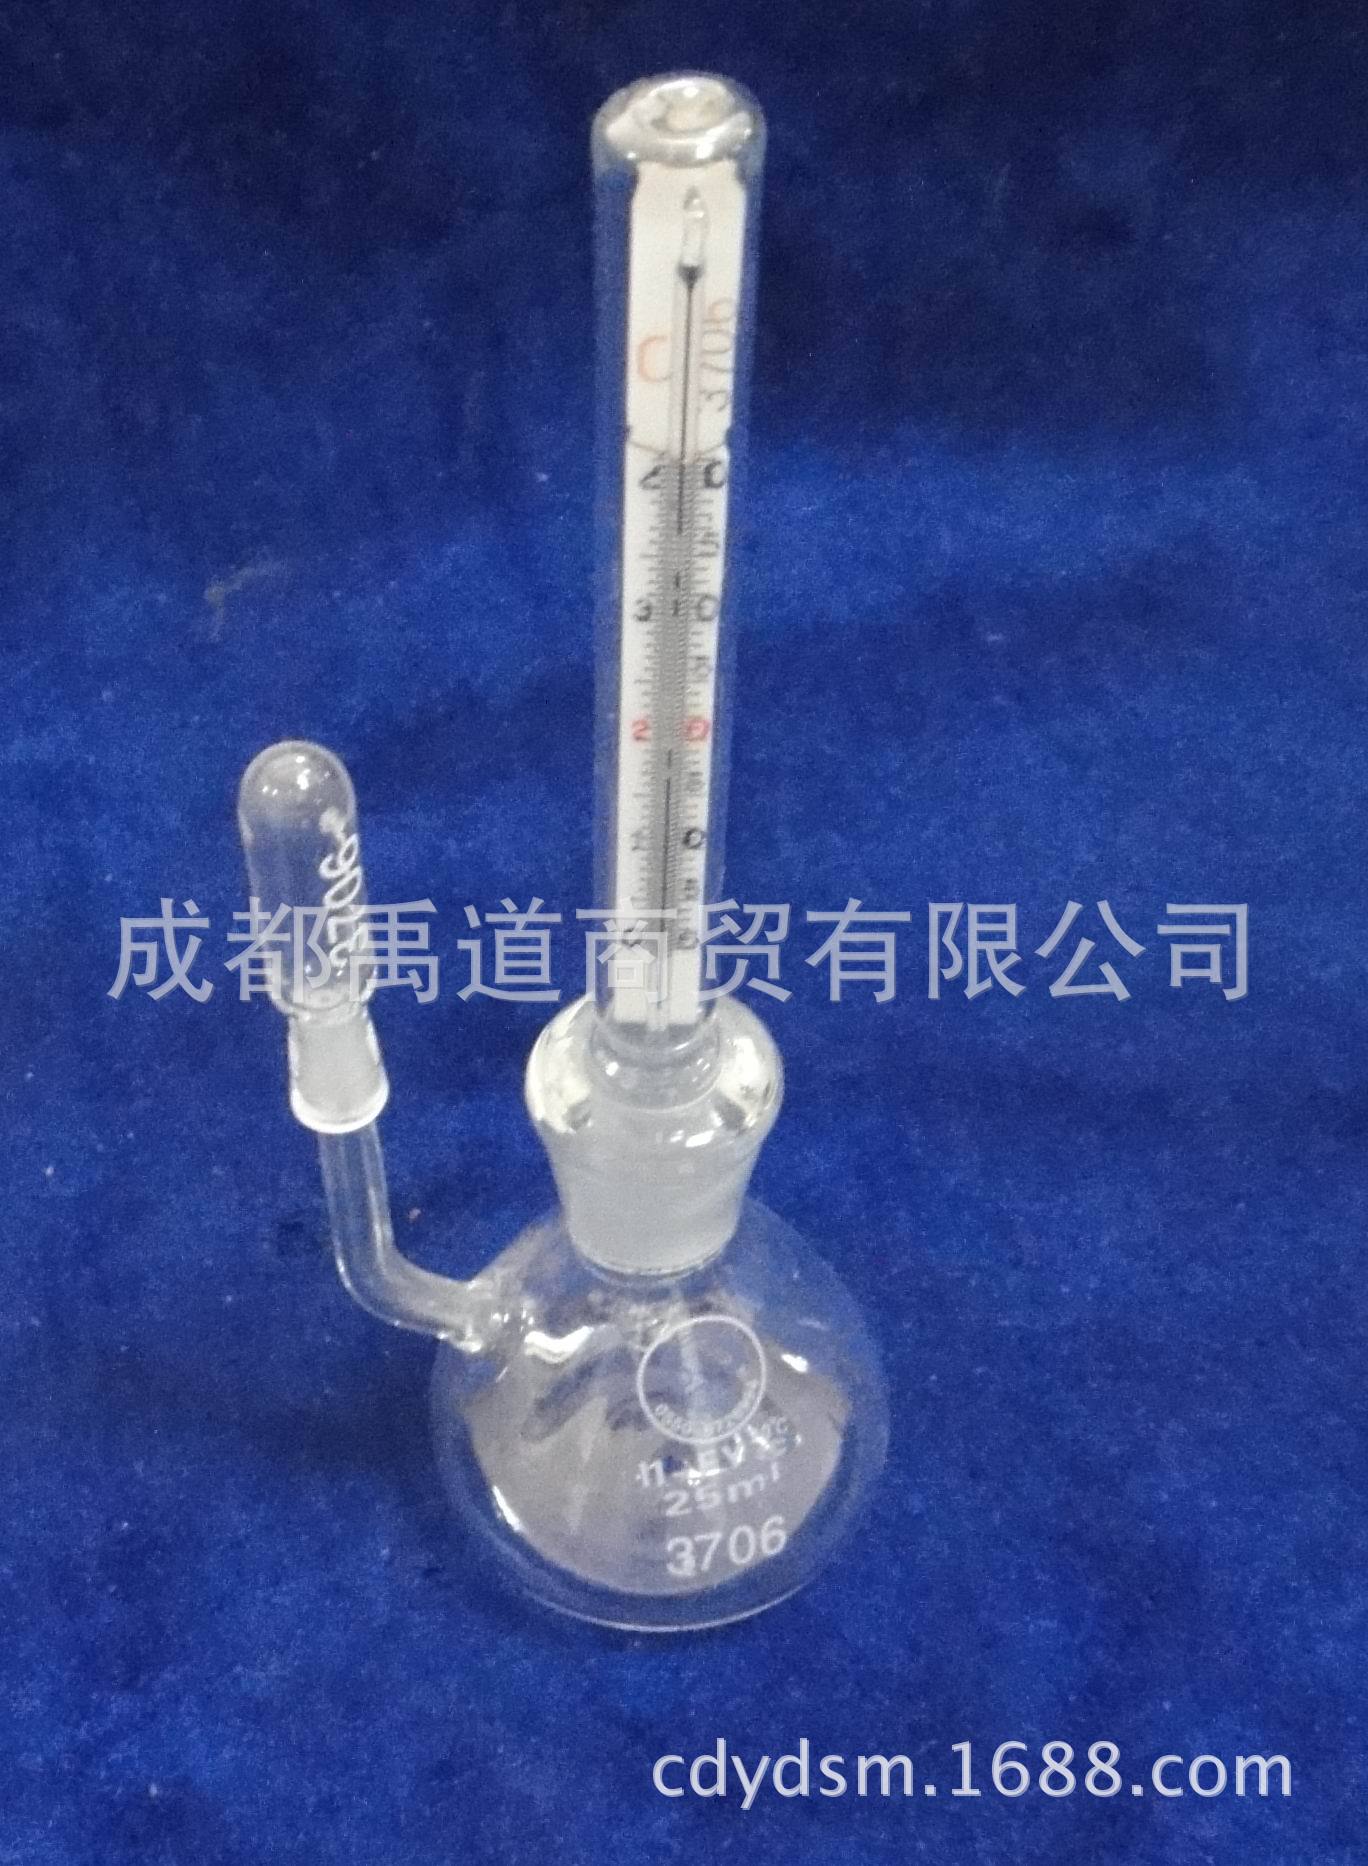 25ml Attached temperature pycnometer Density Bottles Pycnometer thermometer Glass pycnometer Own thermometer